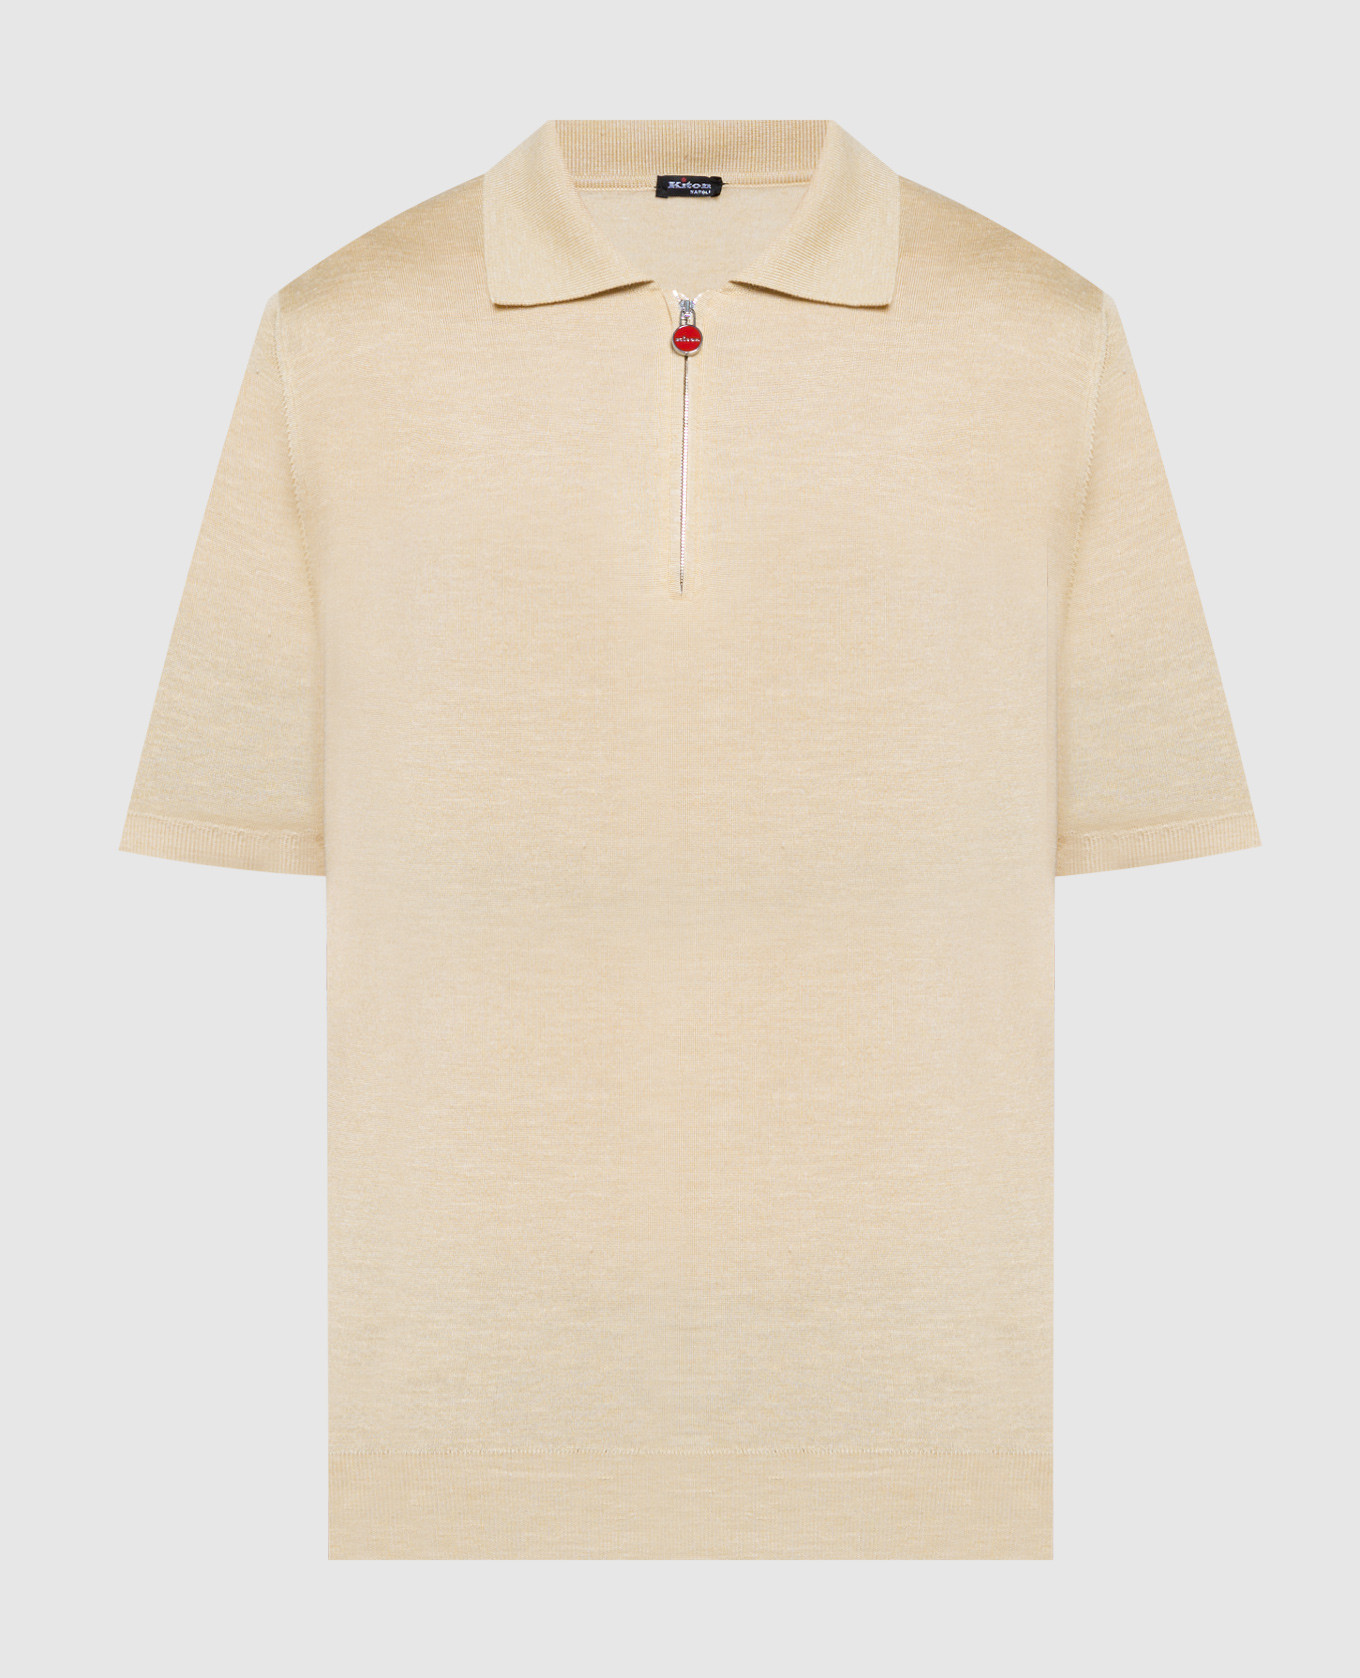 Yellow polo shirt made of silk, cashmere and linen